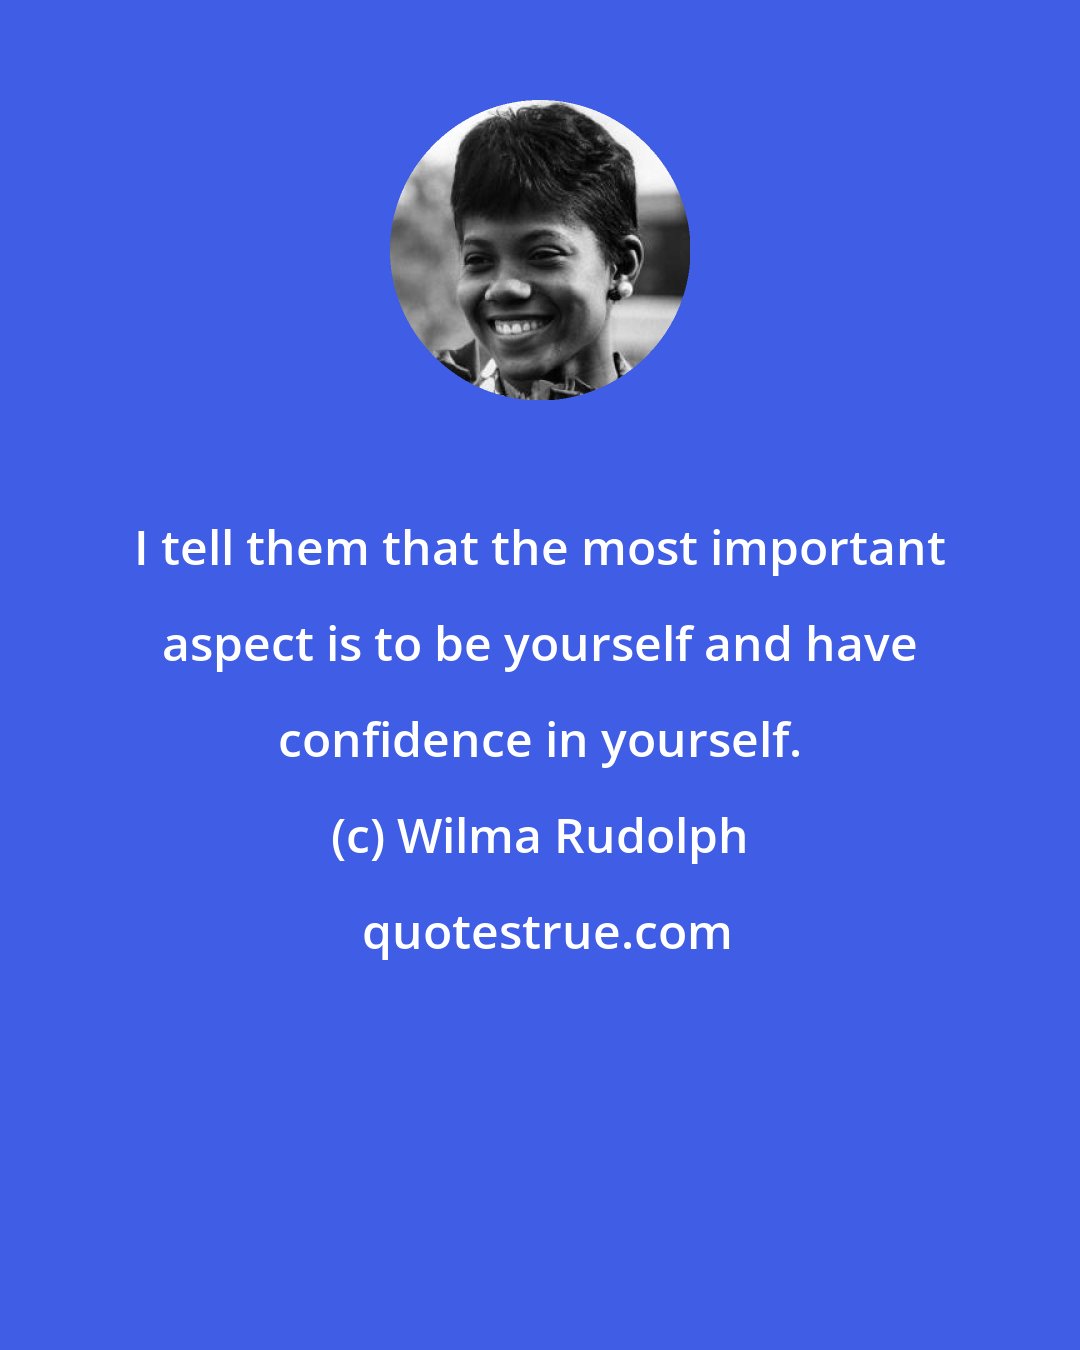 Wilma Rudolph: I tell them that the most important aspect is to be yourself and have confidence in yourself.